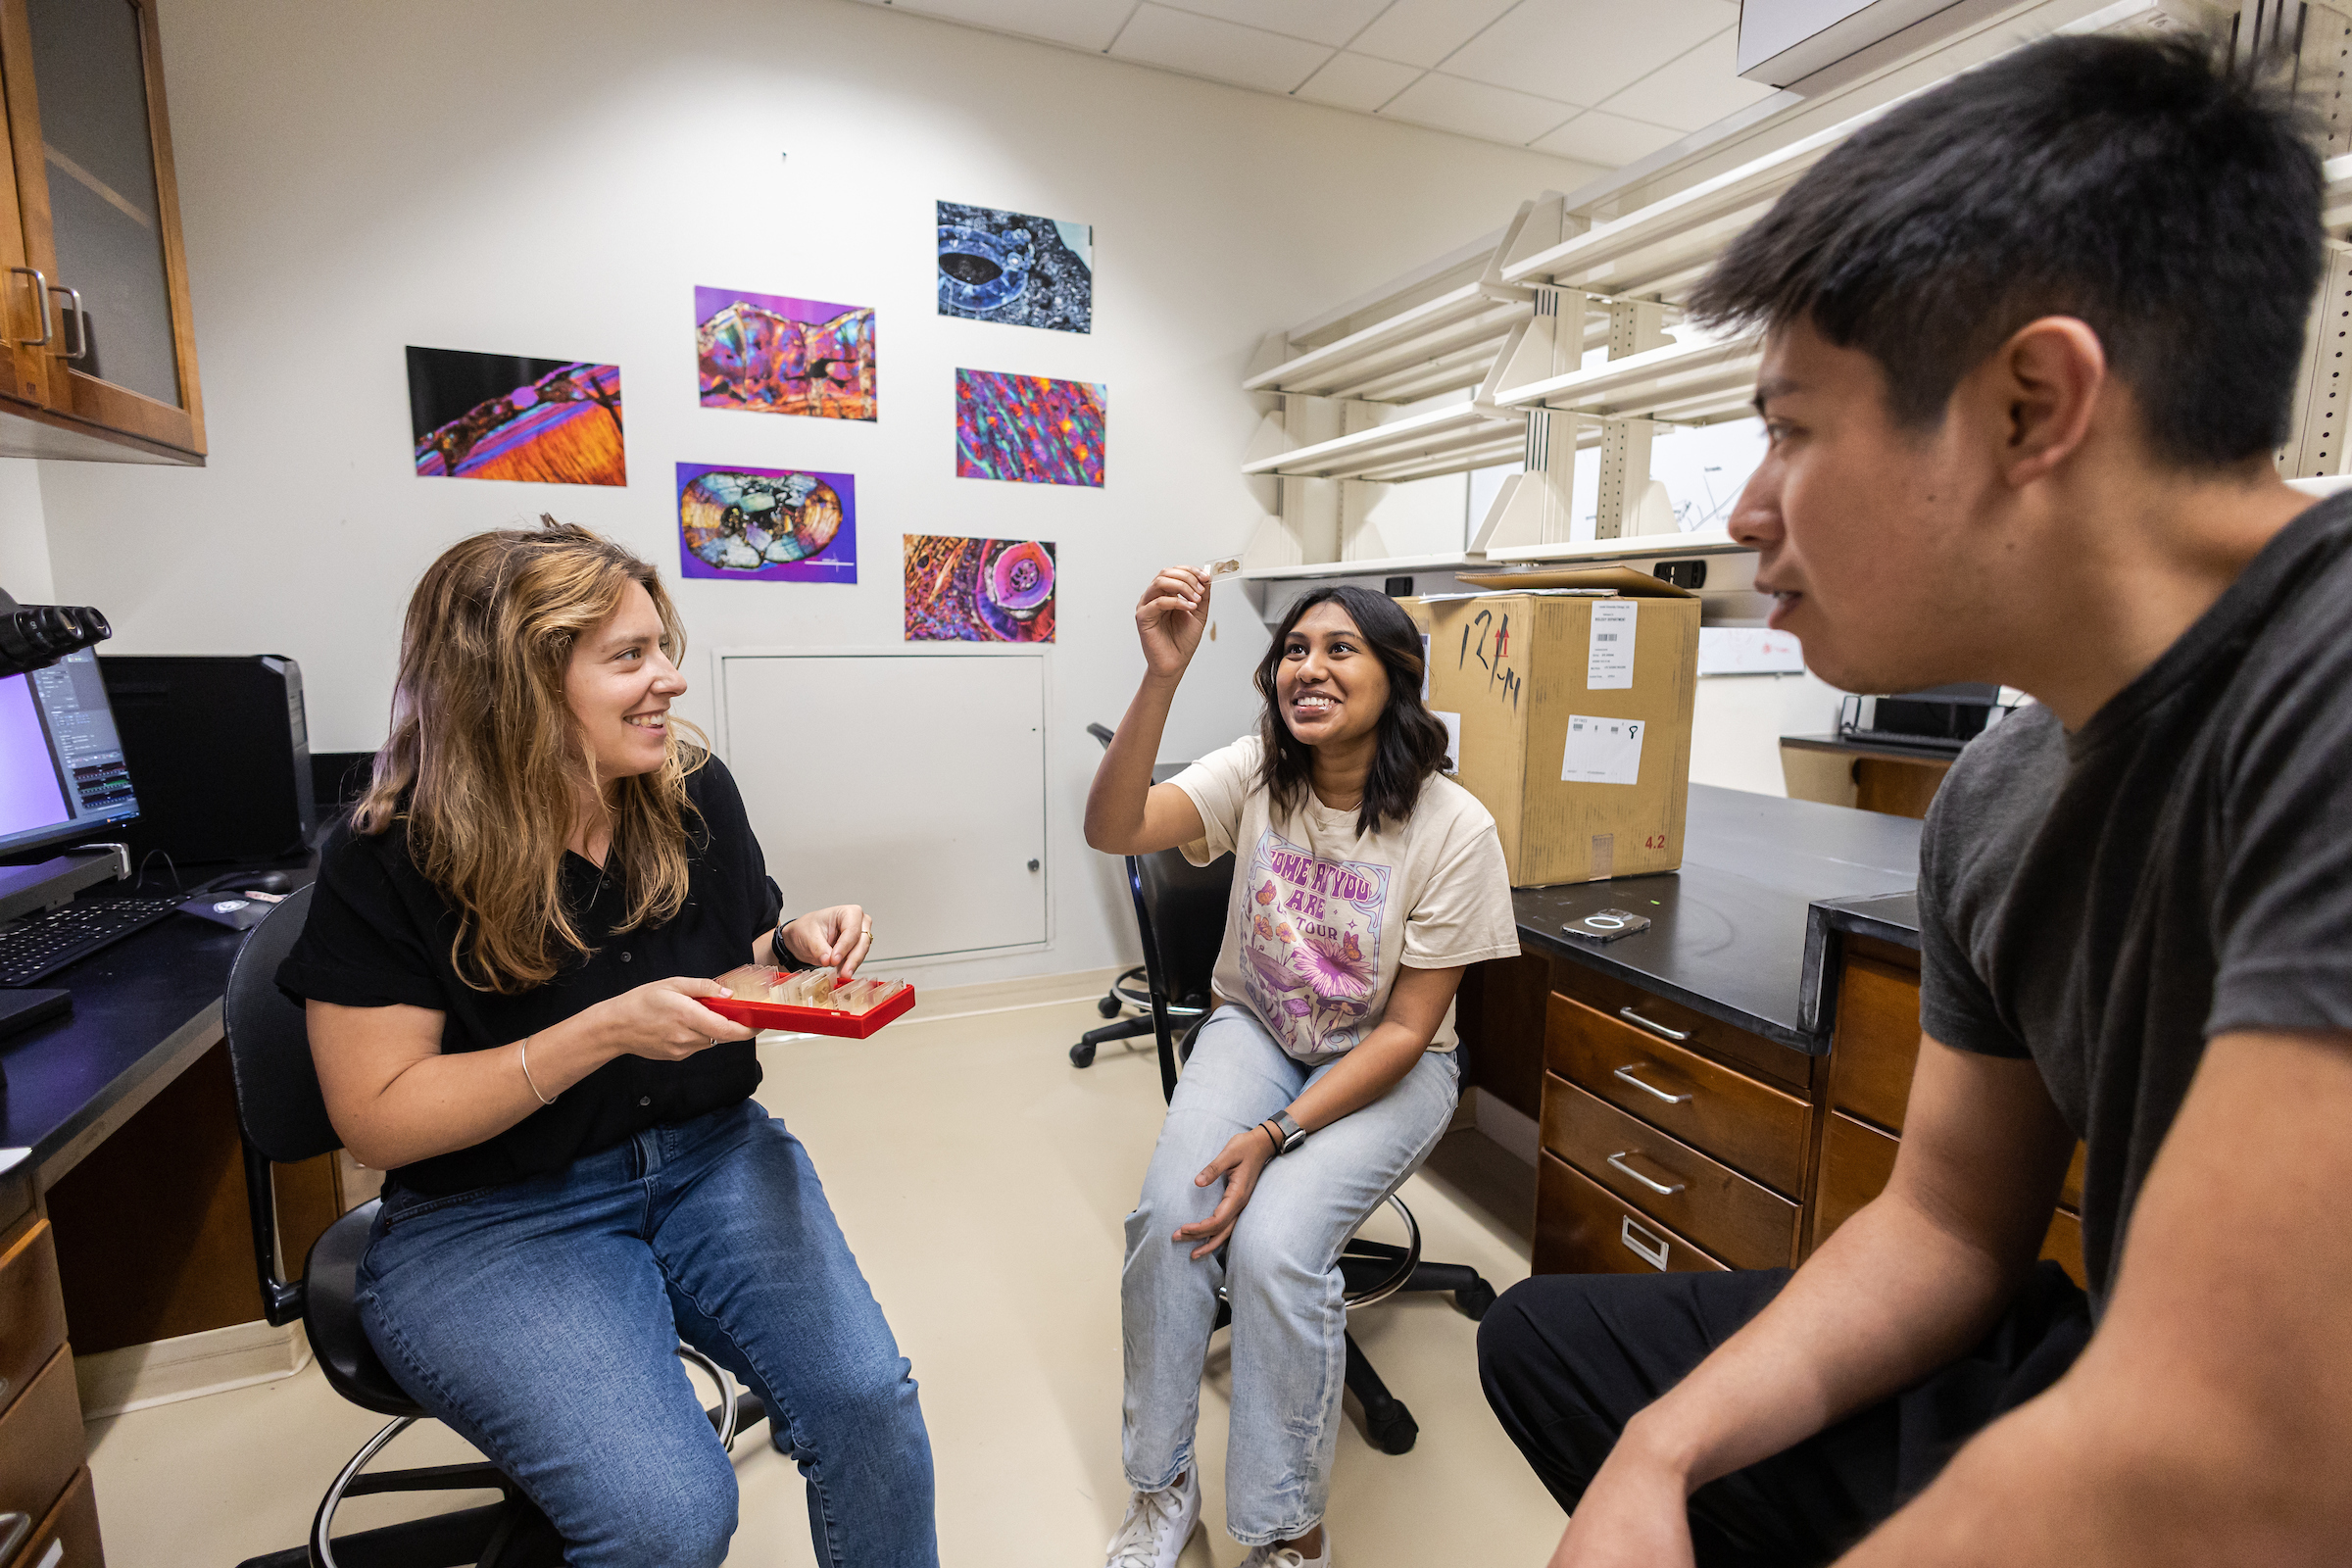 Megan Whitney speaks to Pranati and Eduardo as Pranati holds up a microscope slide and looks at the sample against the light